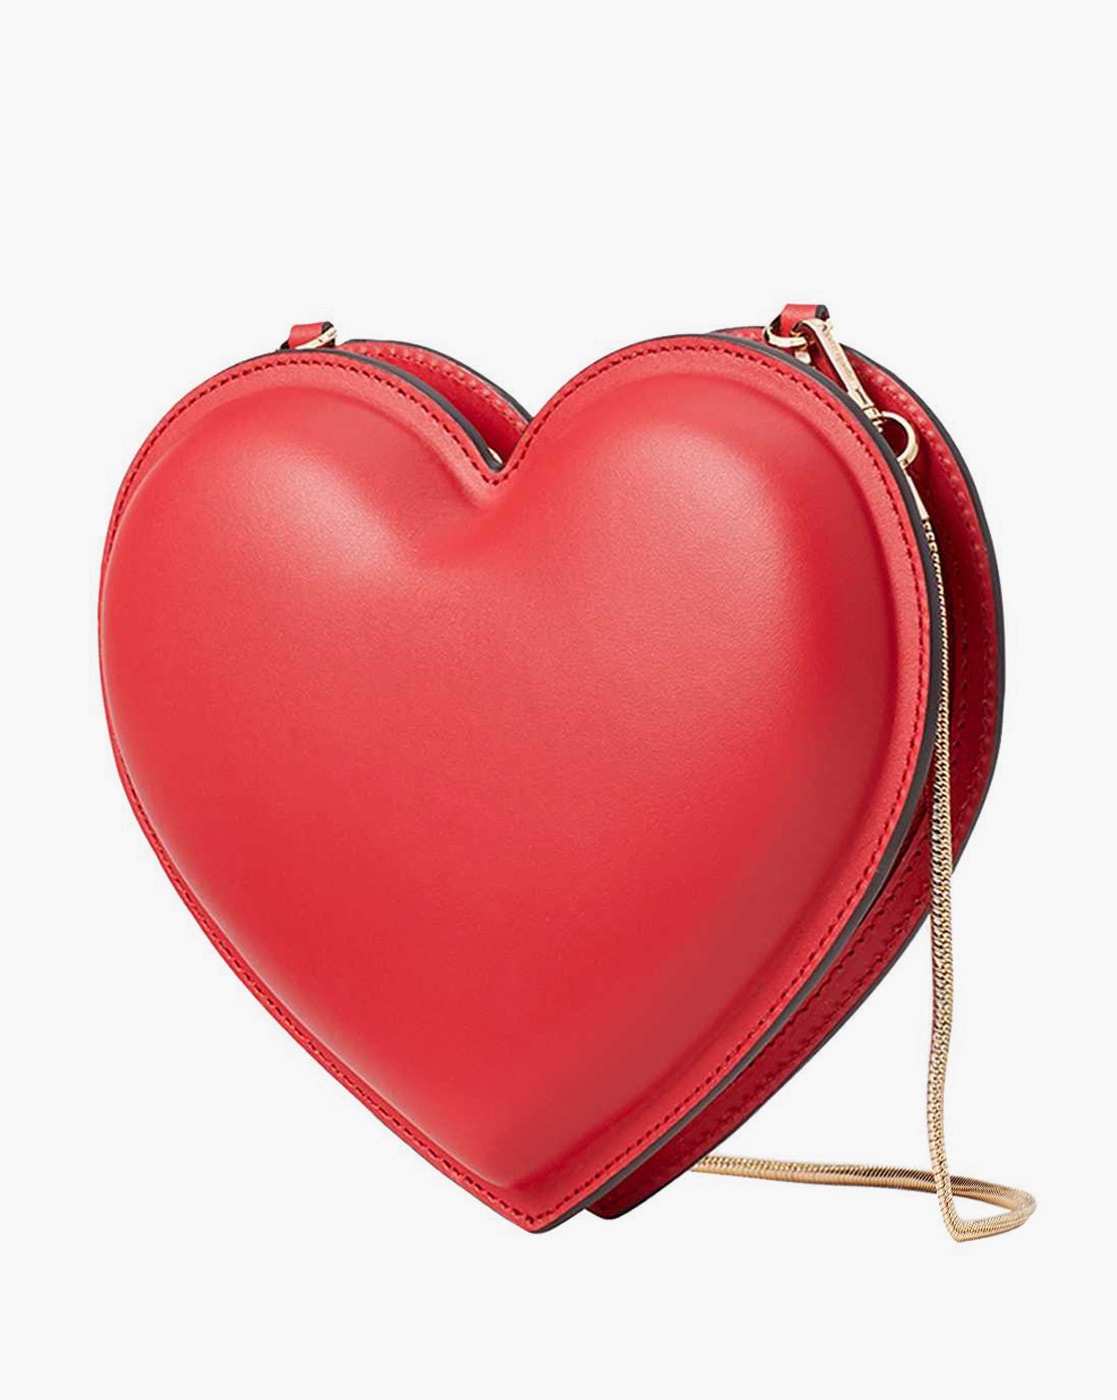 Kate Spade New York Red Heart-shaped Heart Bag Chain Small